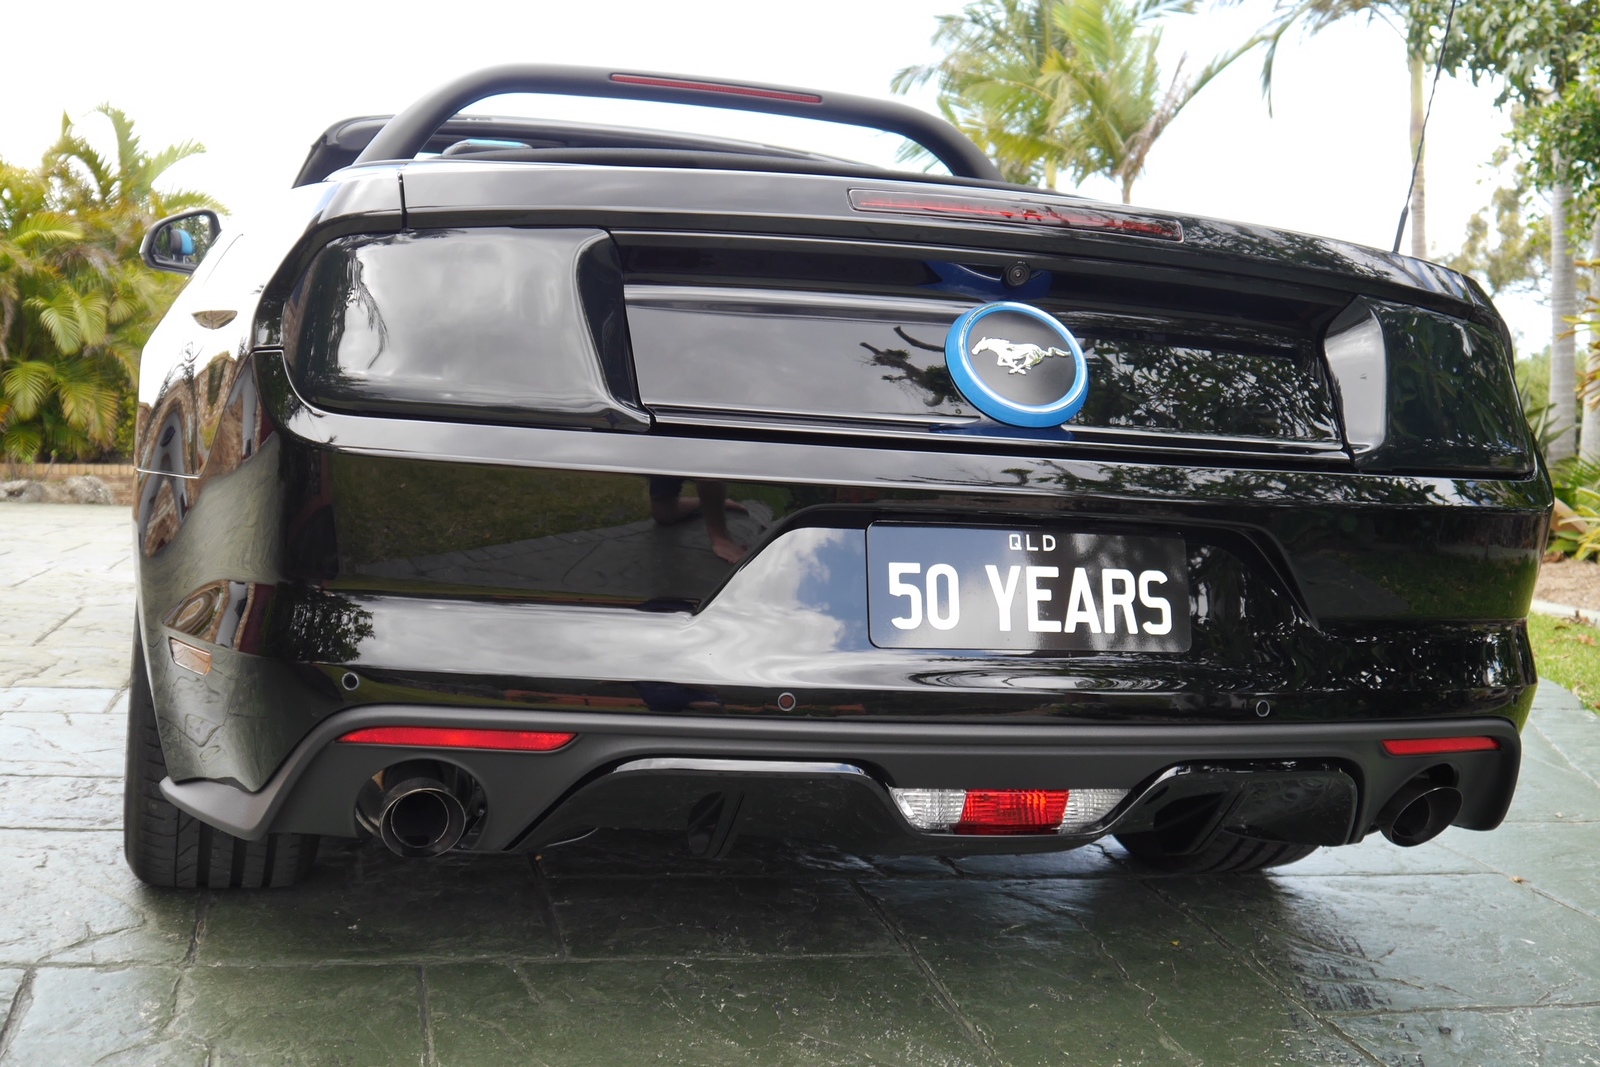 GT Styling  BlackOut Taillight Covers